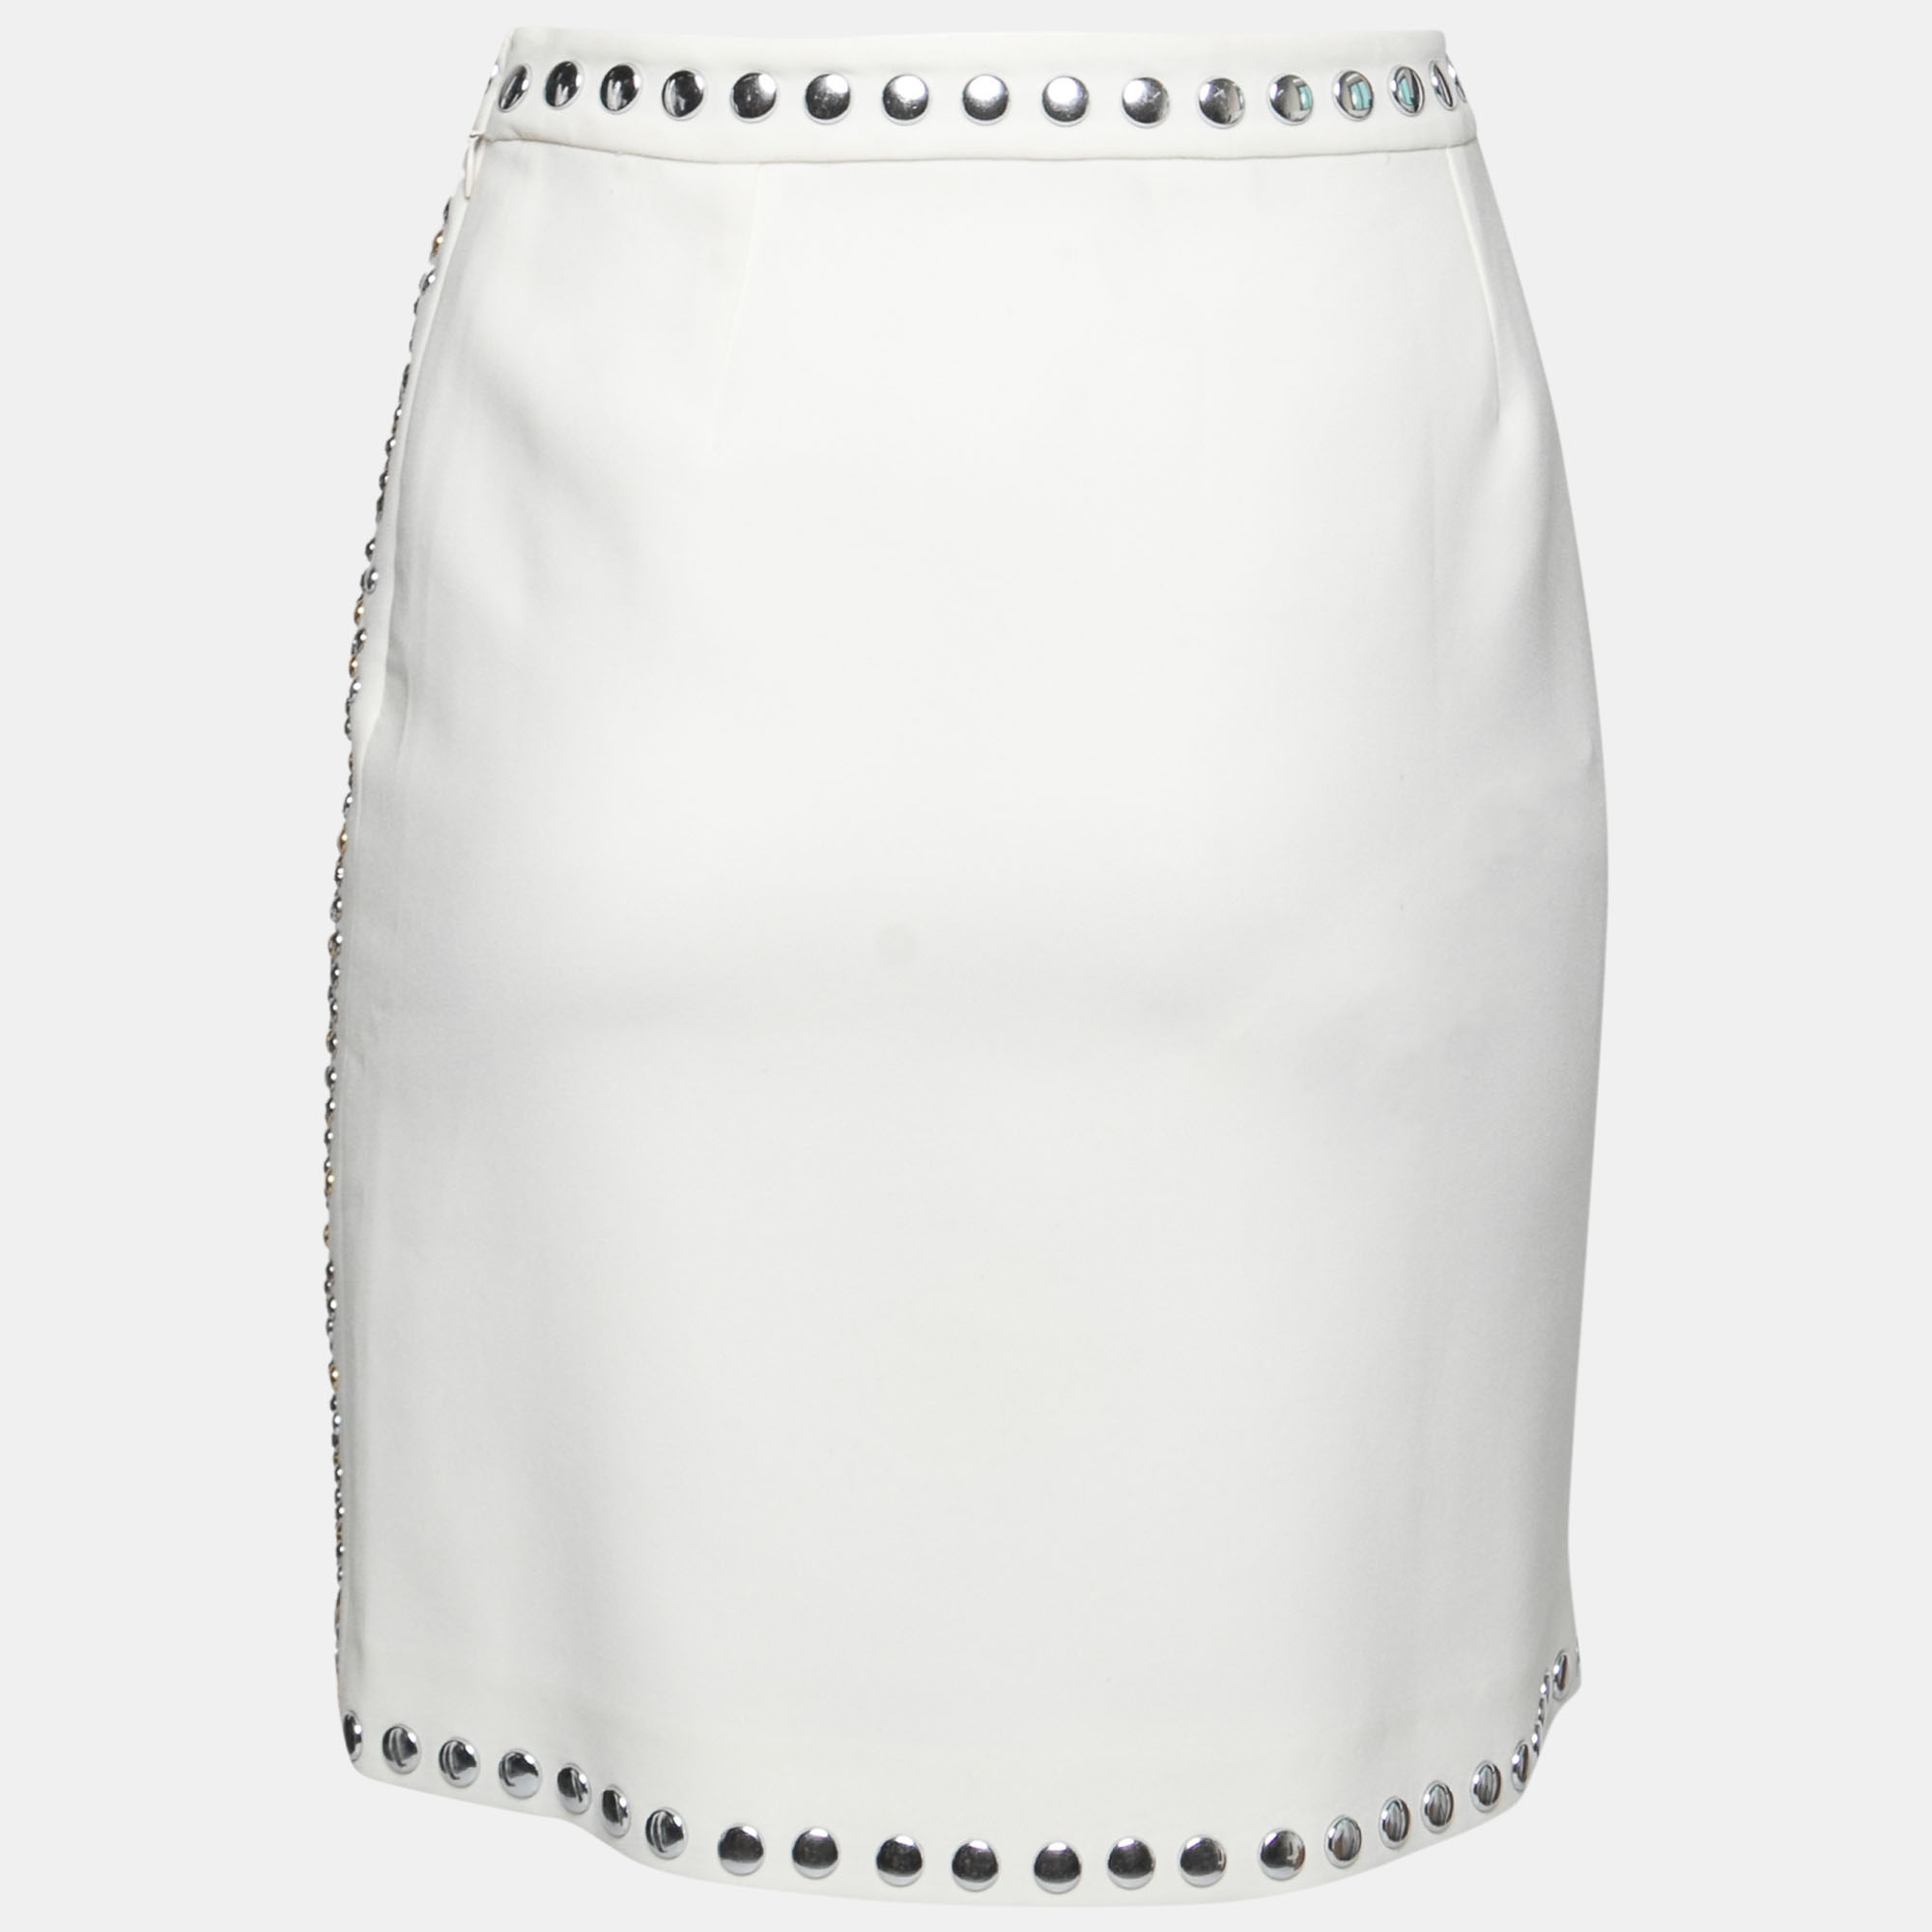 

Moschino Cheap and Chic Cream Crepe Beaded Floral Pattern Skirt